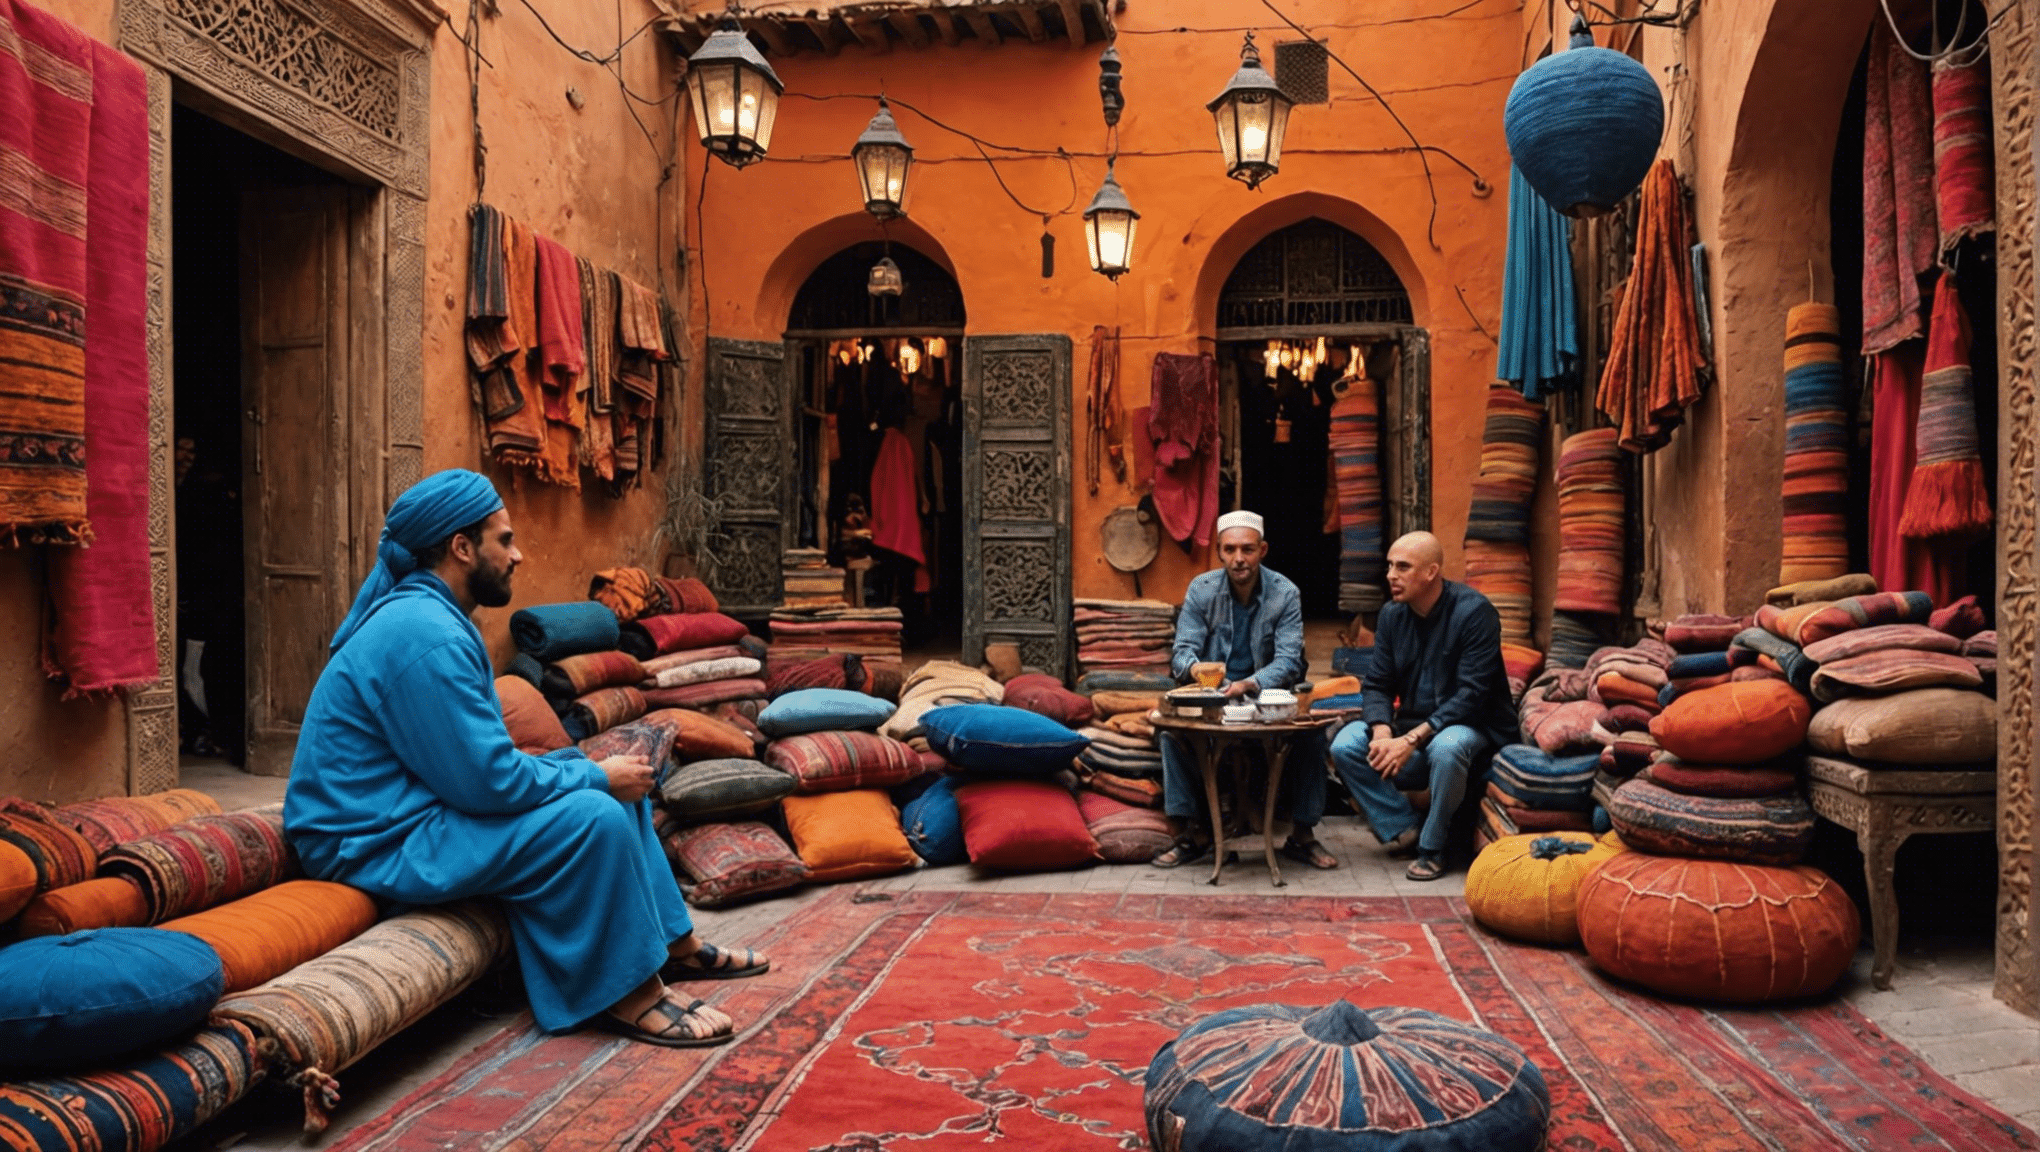 explore the ultimate adventure getaway destination and discover the vibrant souks and exotic rugs of a moroccan city.